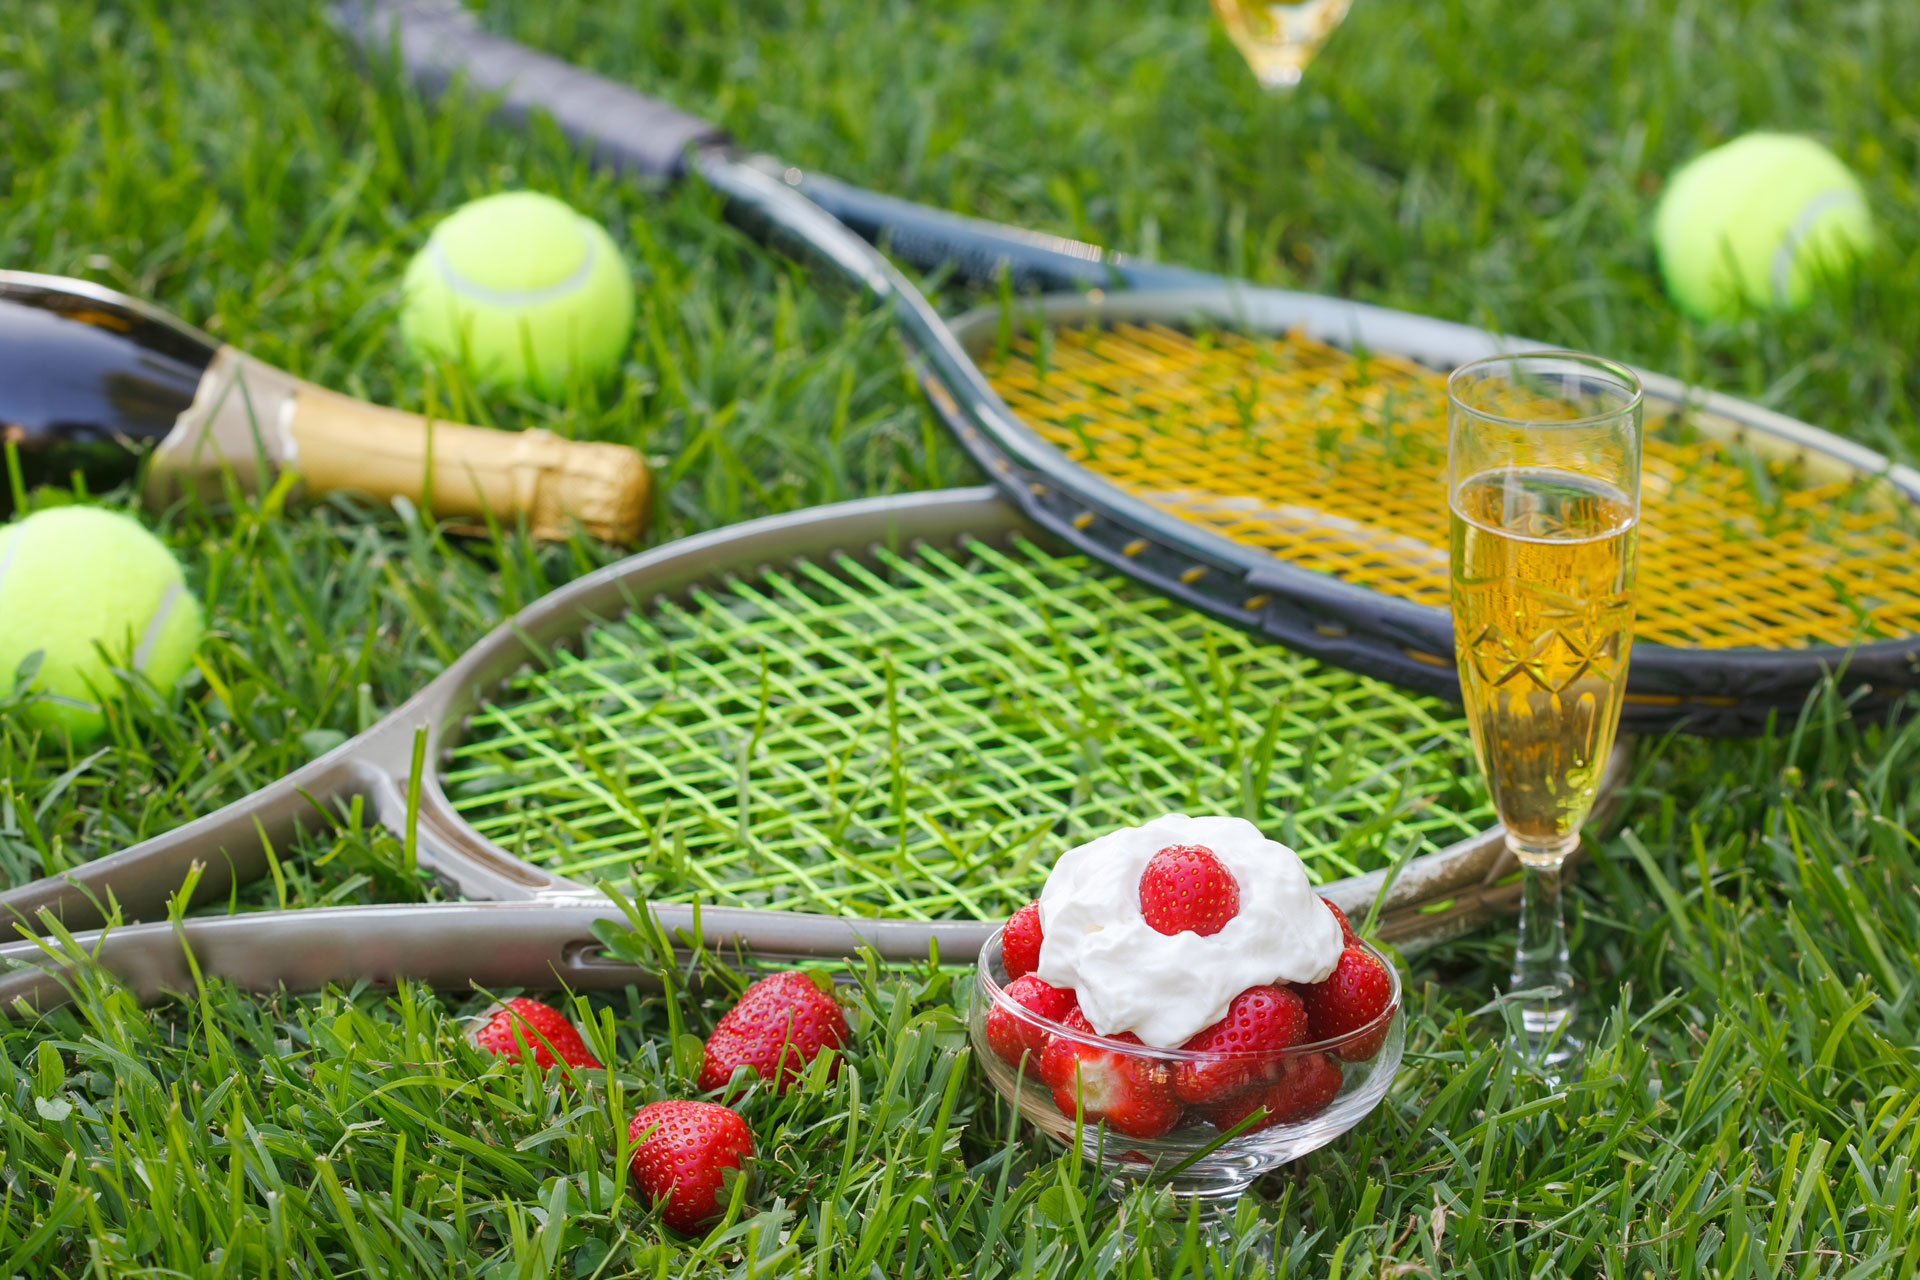 What Are The Wimbledon Traditions?